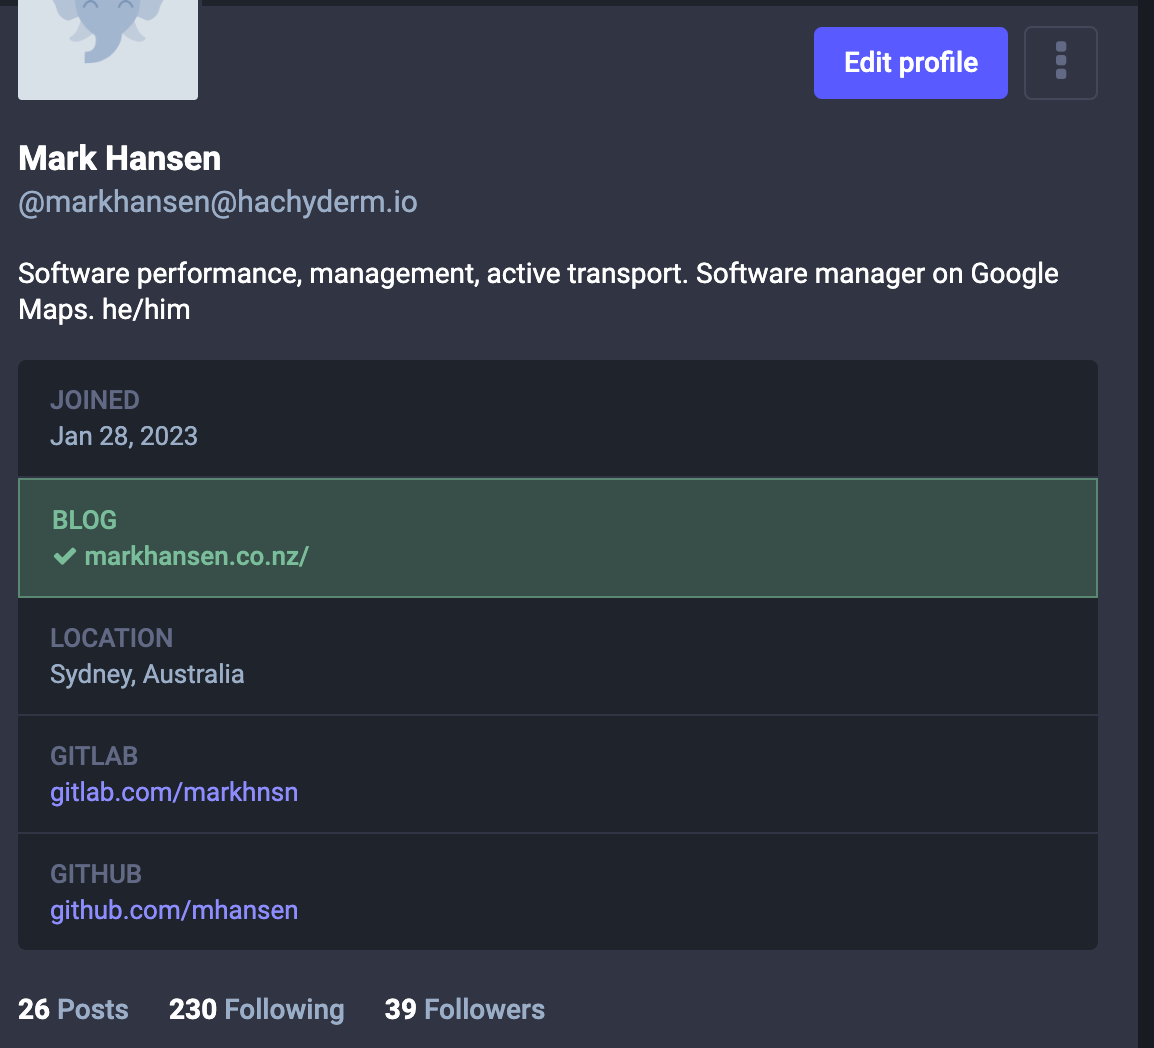 My mastodon profile, with BLOG markhansen.co.nz highlighted and ticked.